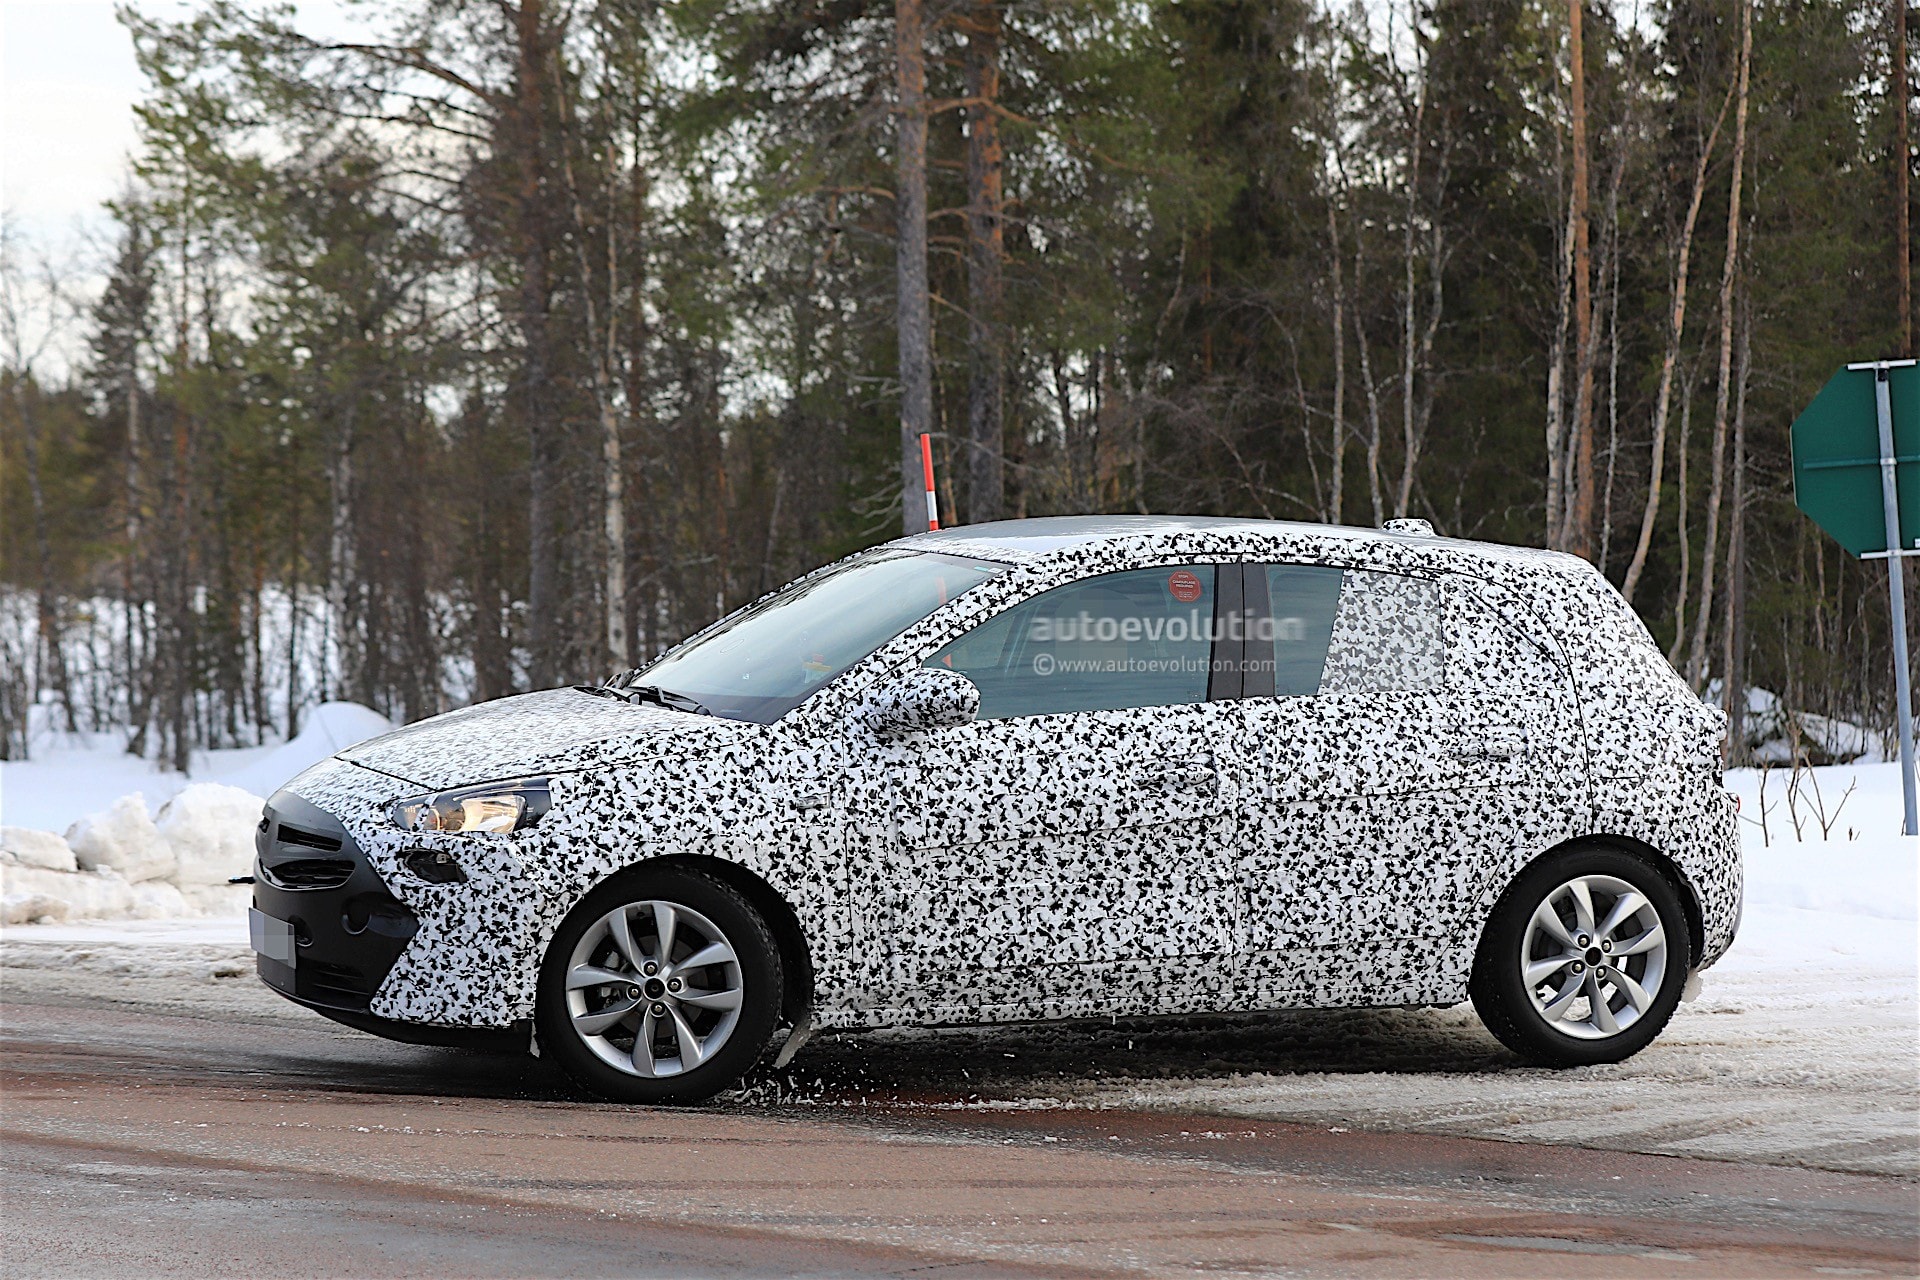 https://s1.cdn.autoevolution.com/images/news/2019-opel-corsa-f-will-not-be-compromised-in-any-way-127615_1.jpg